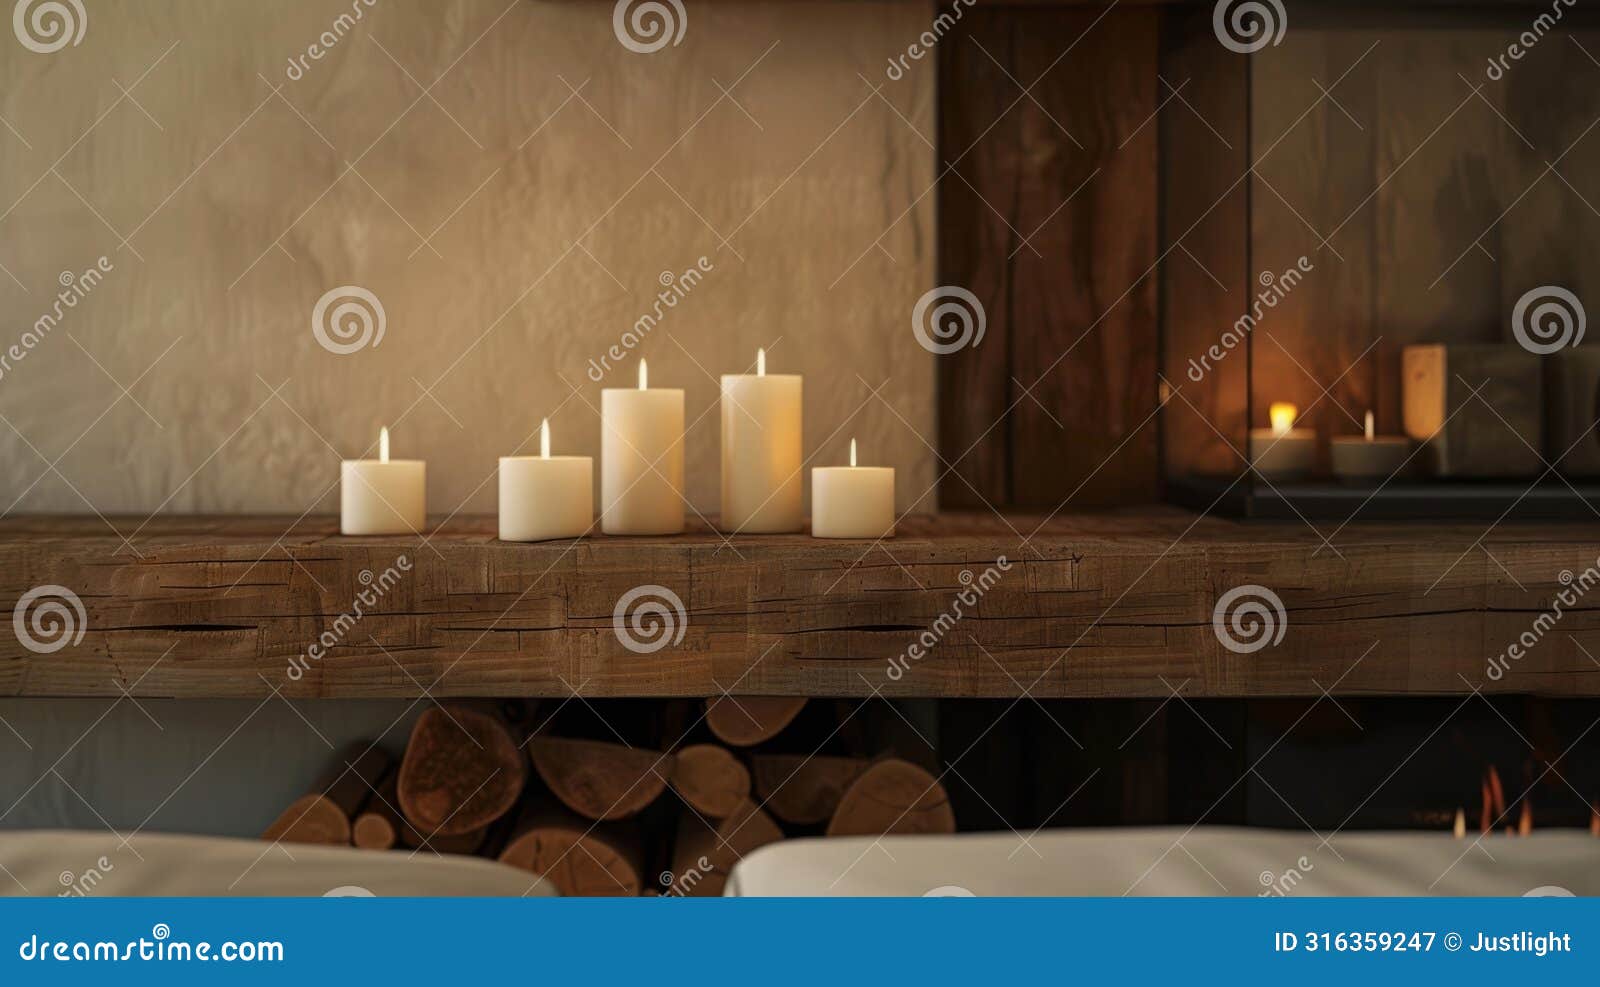 the tranquil beauty of a minimalist fireplace mantel adorned with unlit taper candles. 2d flat cartoon